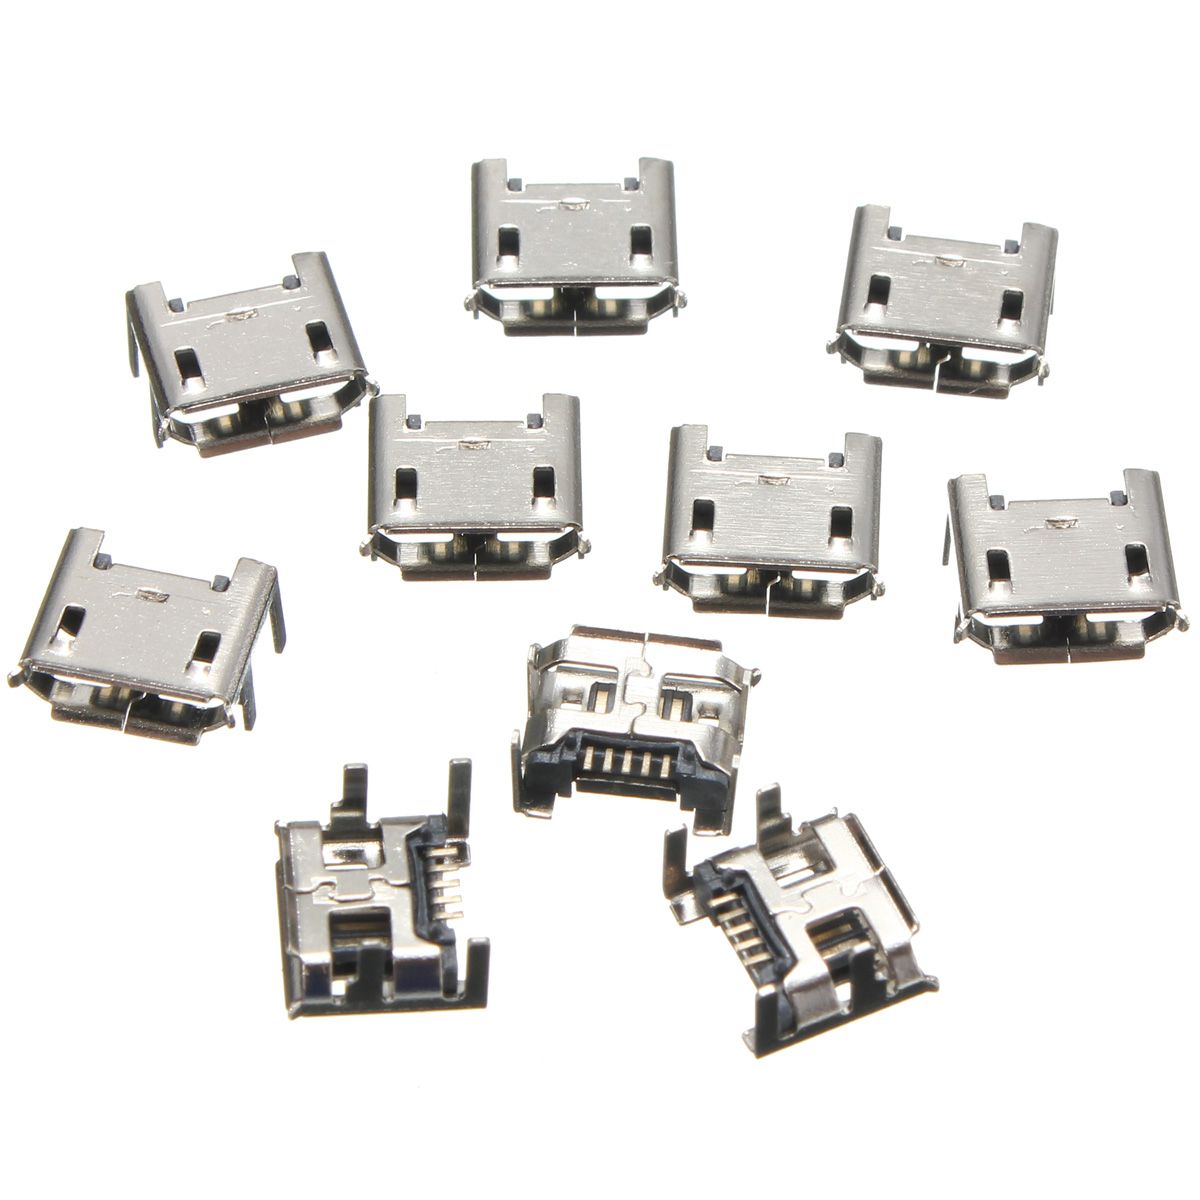 30pcs-Micro-USB-Type-B-5-Pin-Female-Socket-4-Vertical-Legs-For-Solder-Connector-1370526